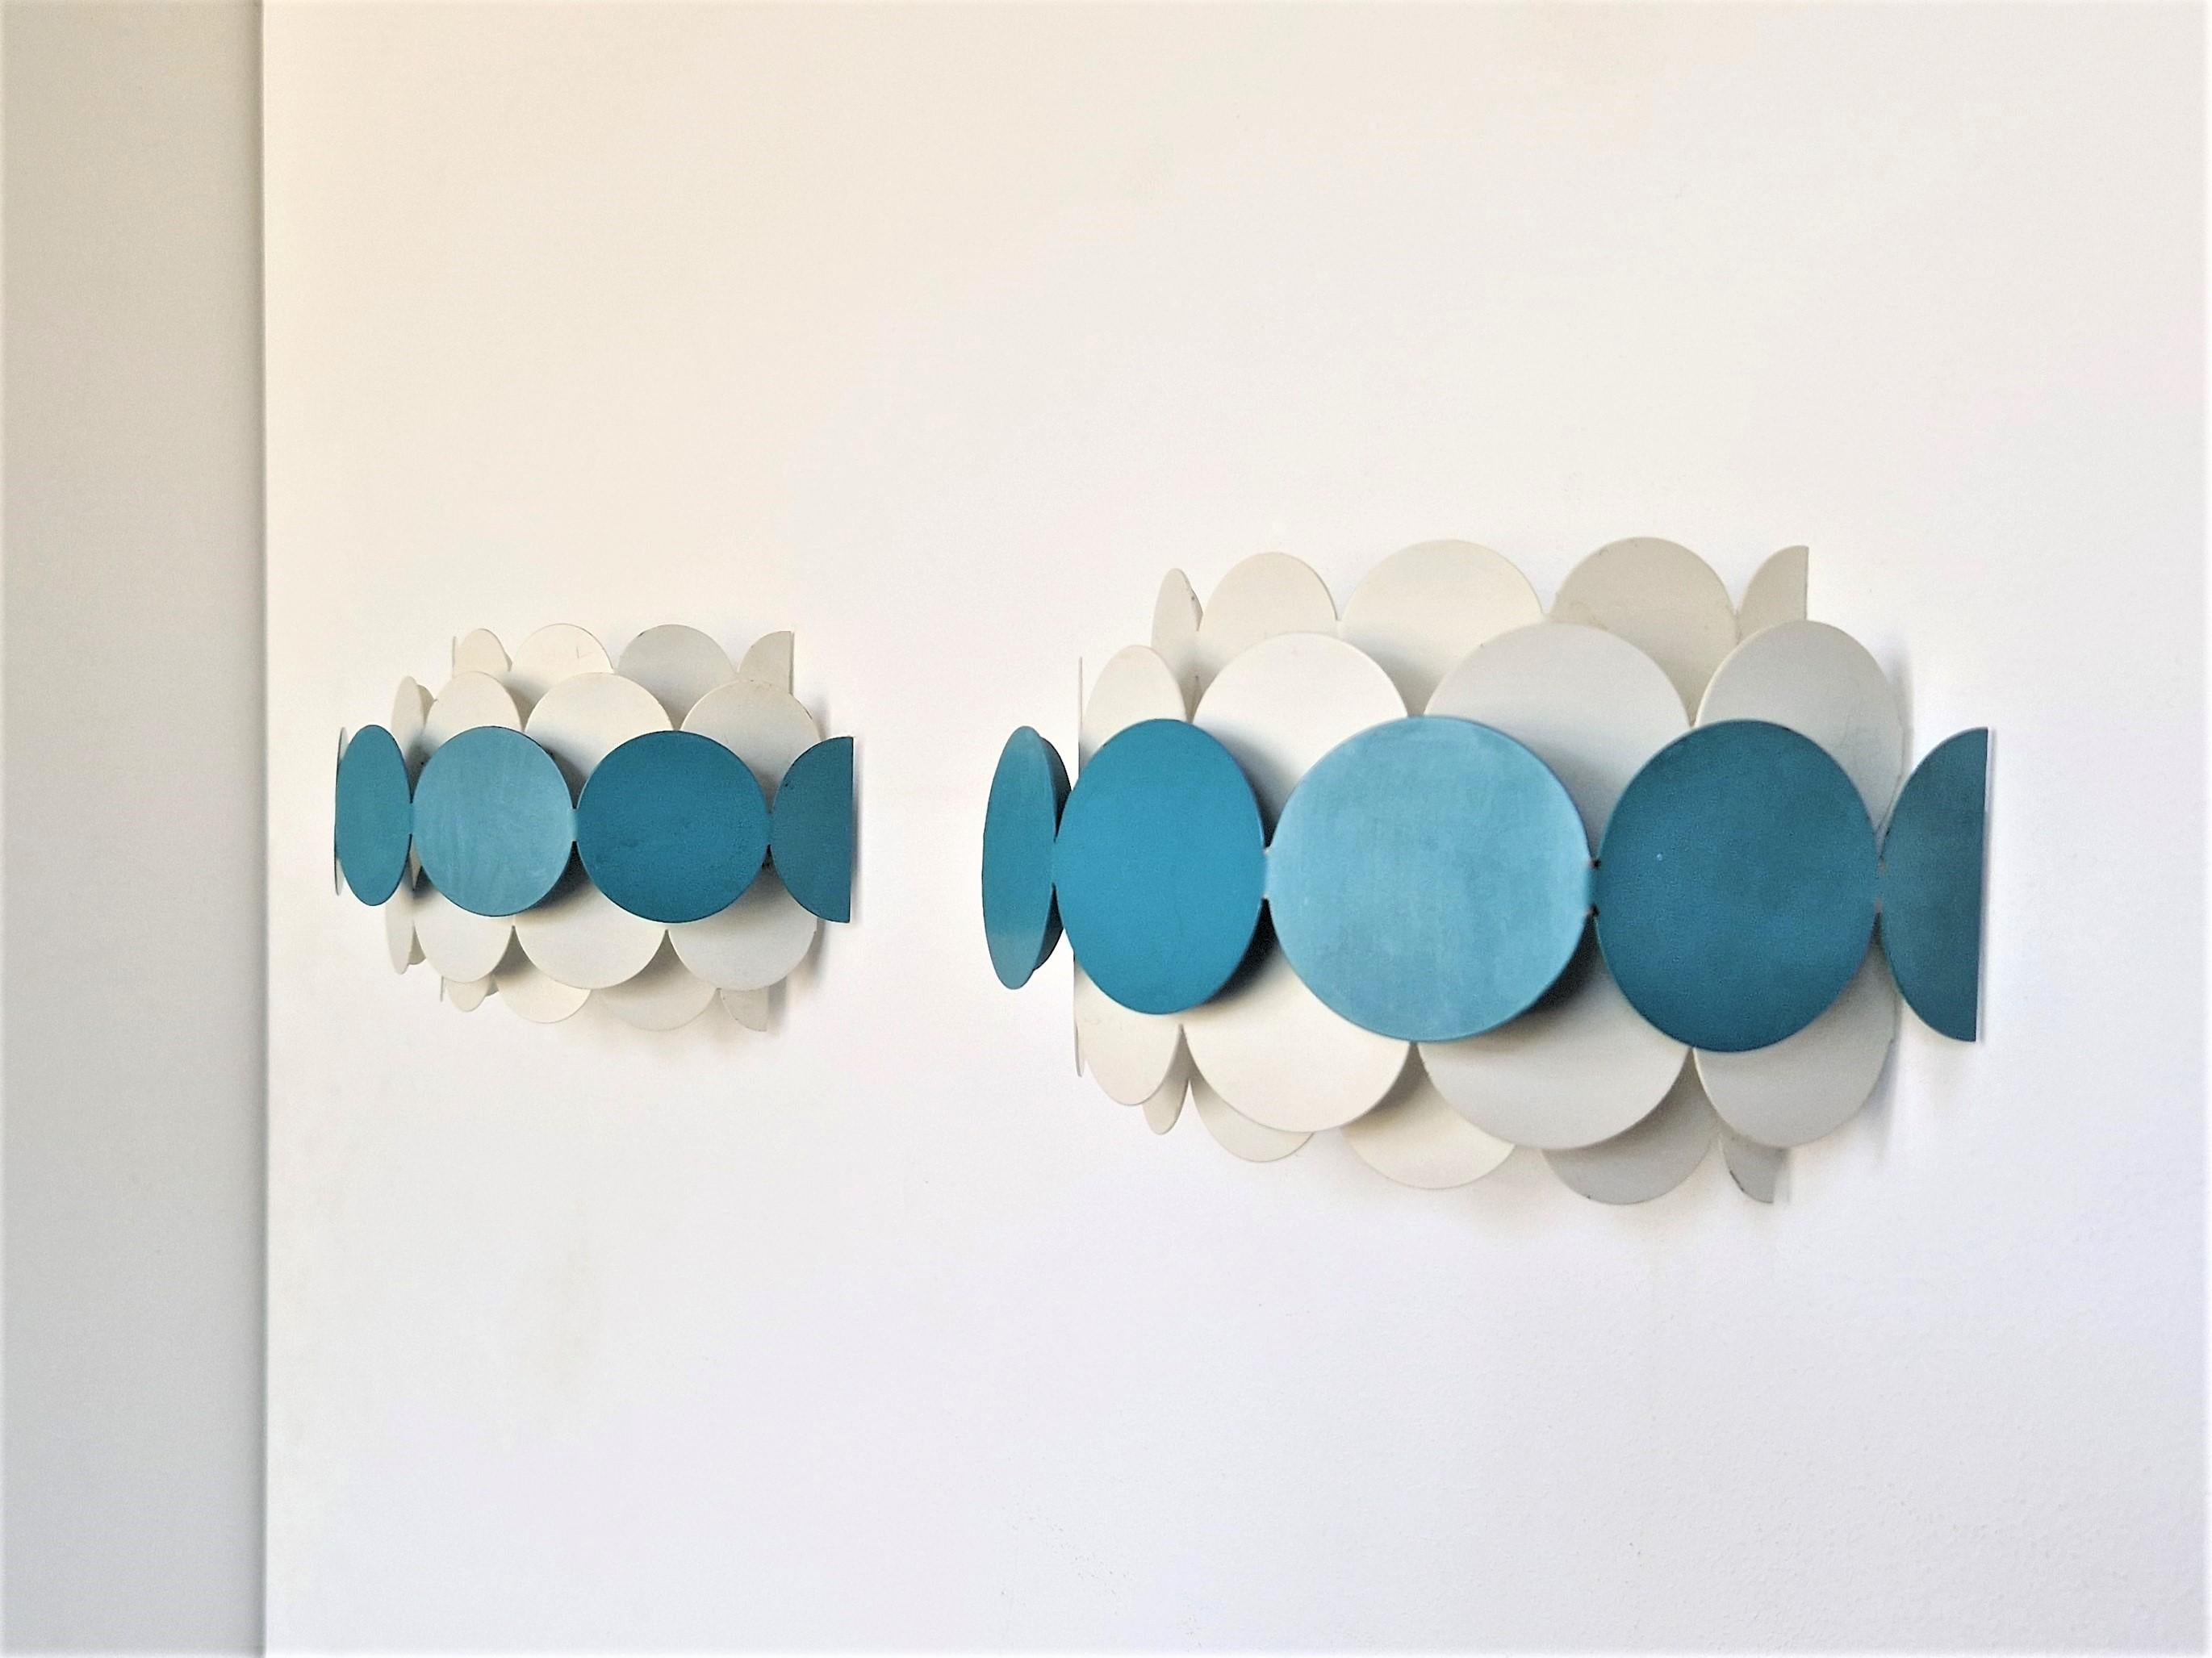 Mid-Century Modern Bright Petrol and White Wall Lamps by Doria Leuchten, Germany 1960's/1970's For Sale